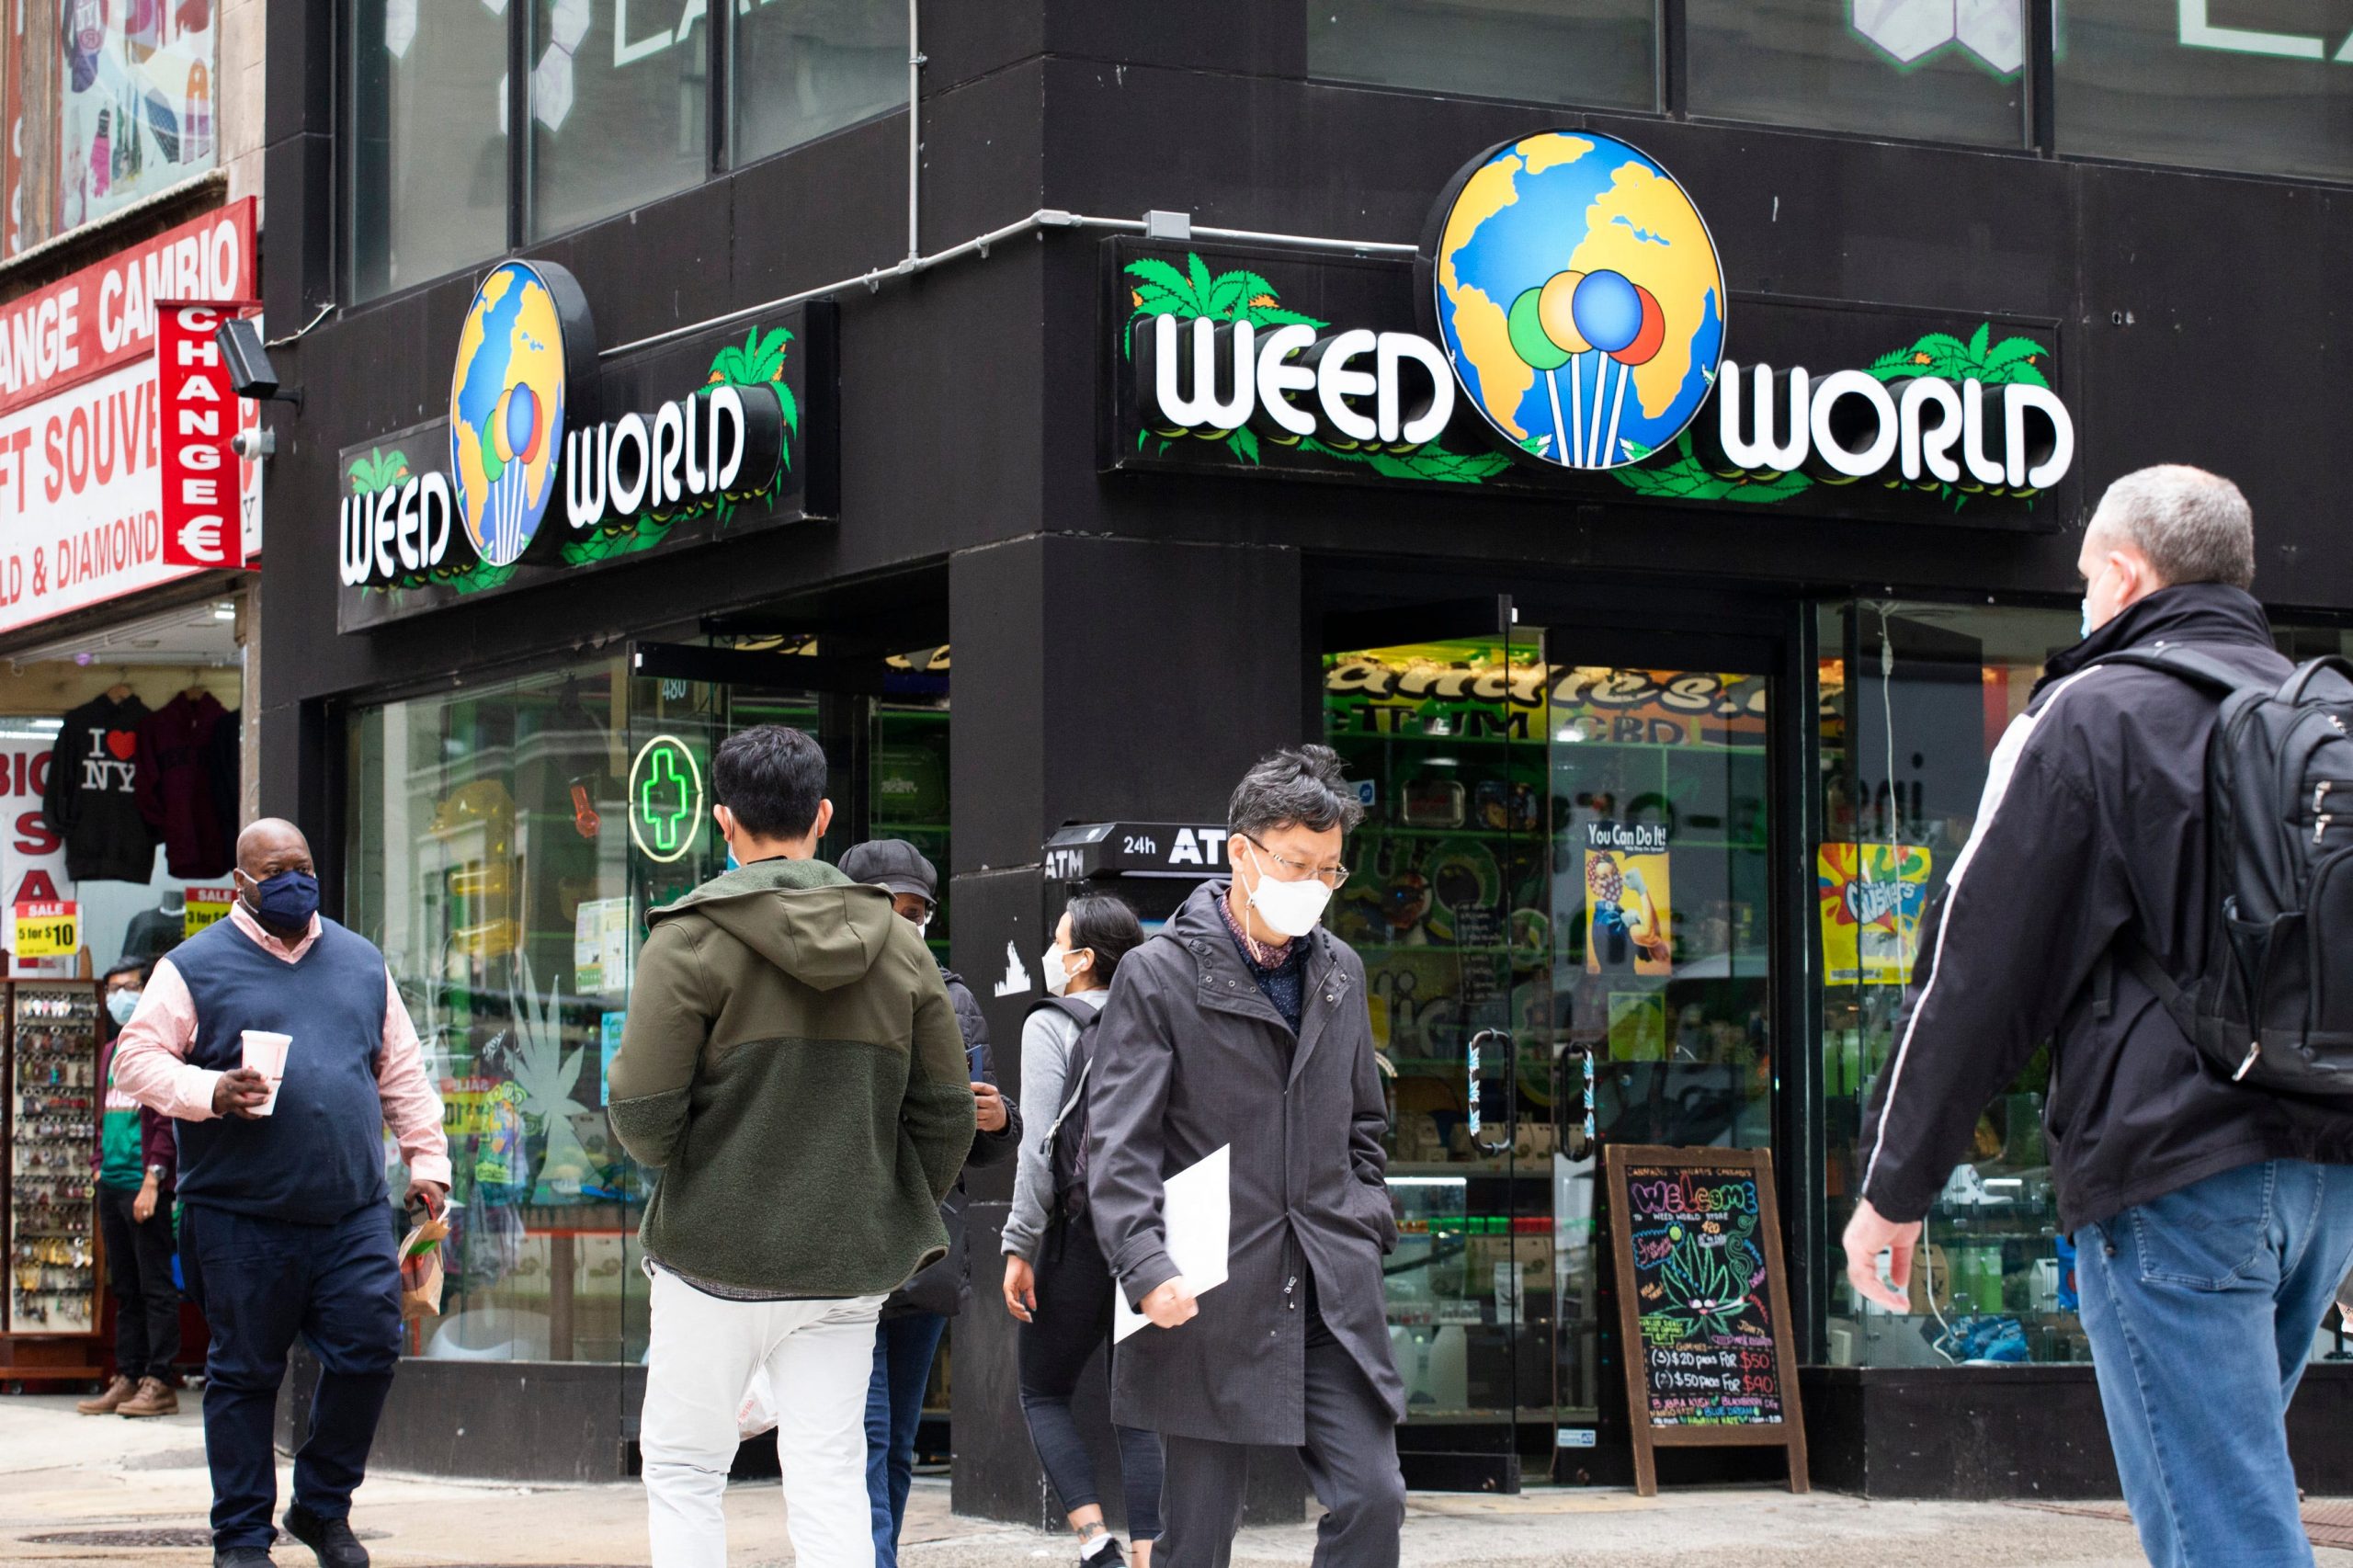 People walk past the Weed World store on March 31, 2021, in Midtown New York